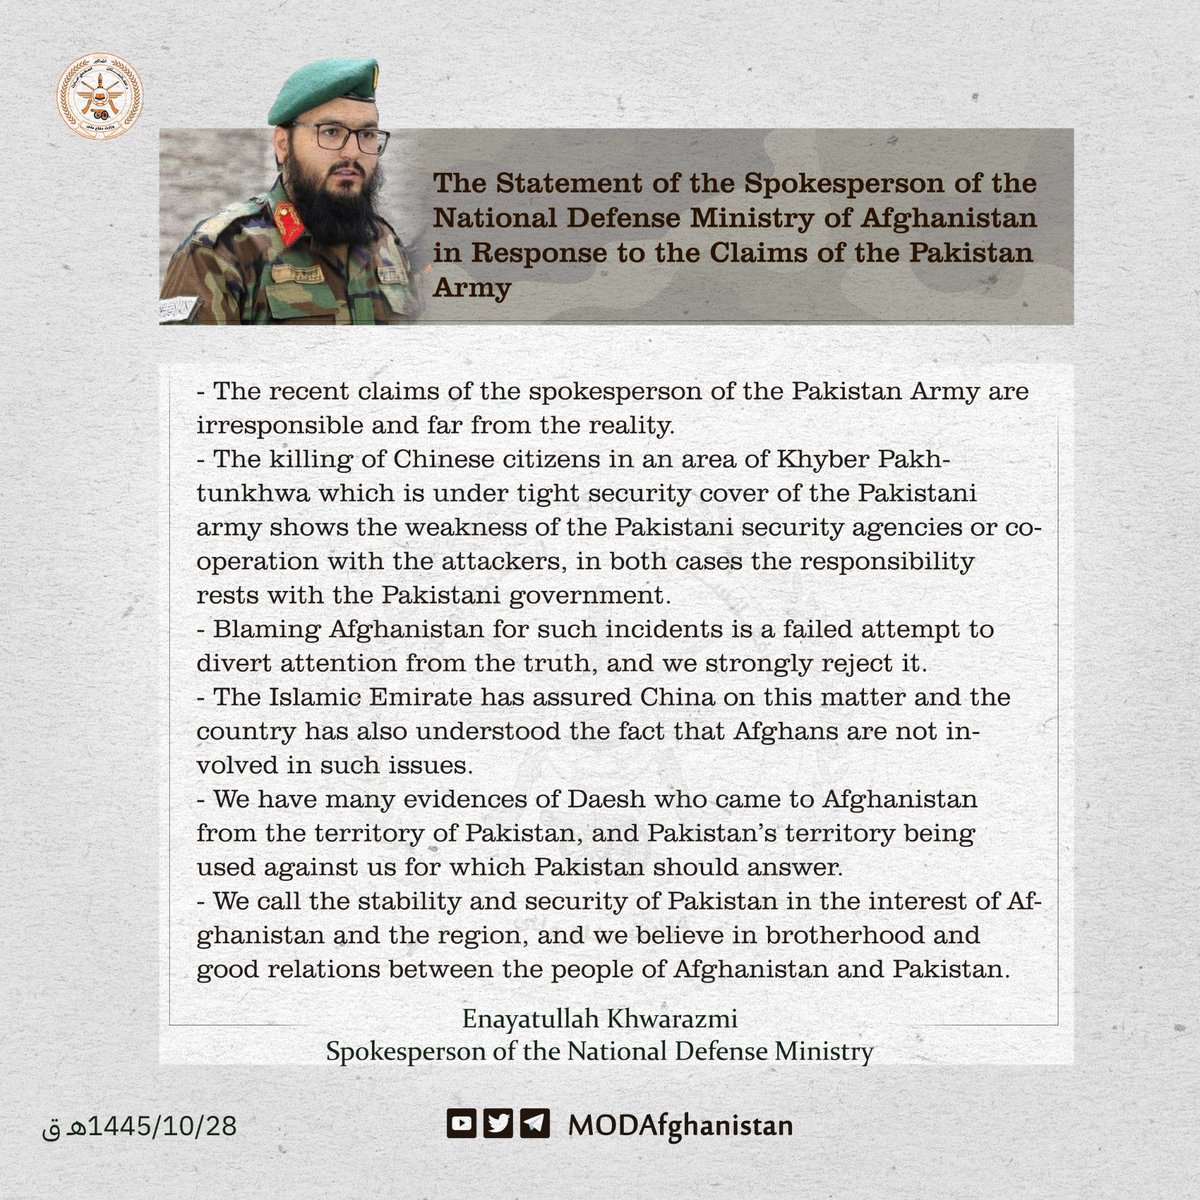 TKD MONITORING: The Afghan National Defense Ministry has issued a statement rejecting the claims made by the Director General of Inter Services Public Relations (DG ISPR) of the Pakistani armed forces during yesterday's press conference. The ministry dismissed allegations that…